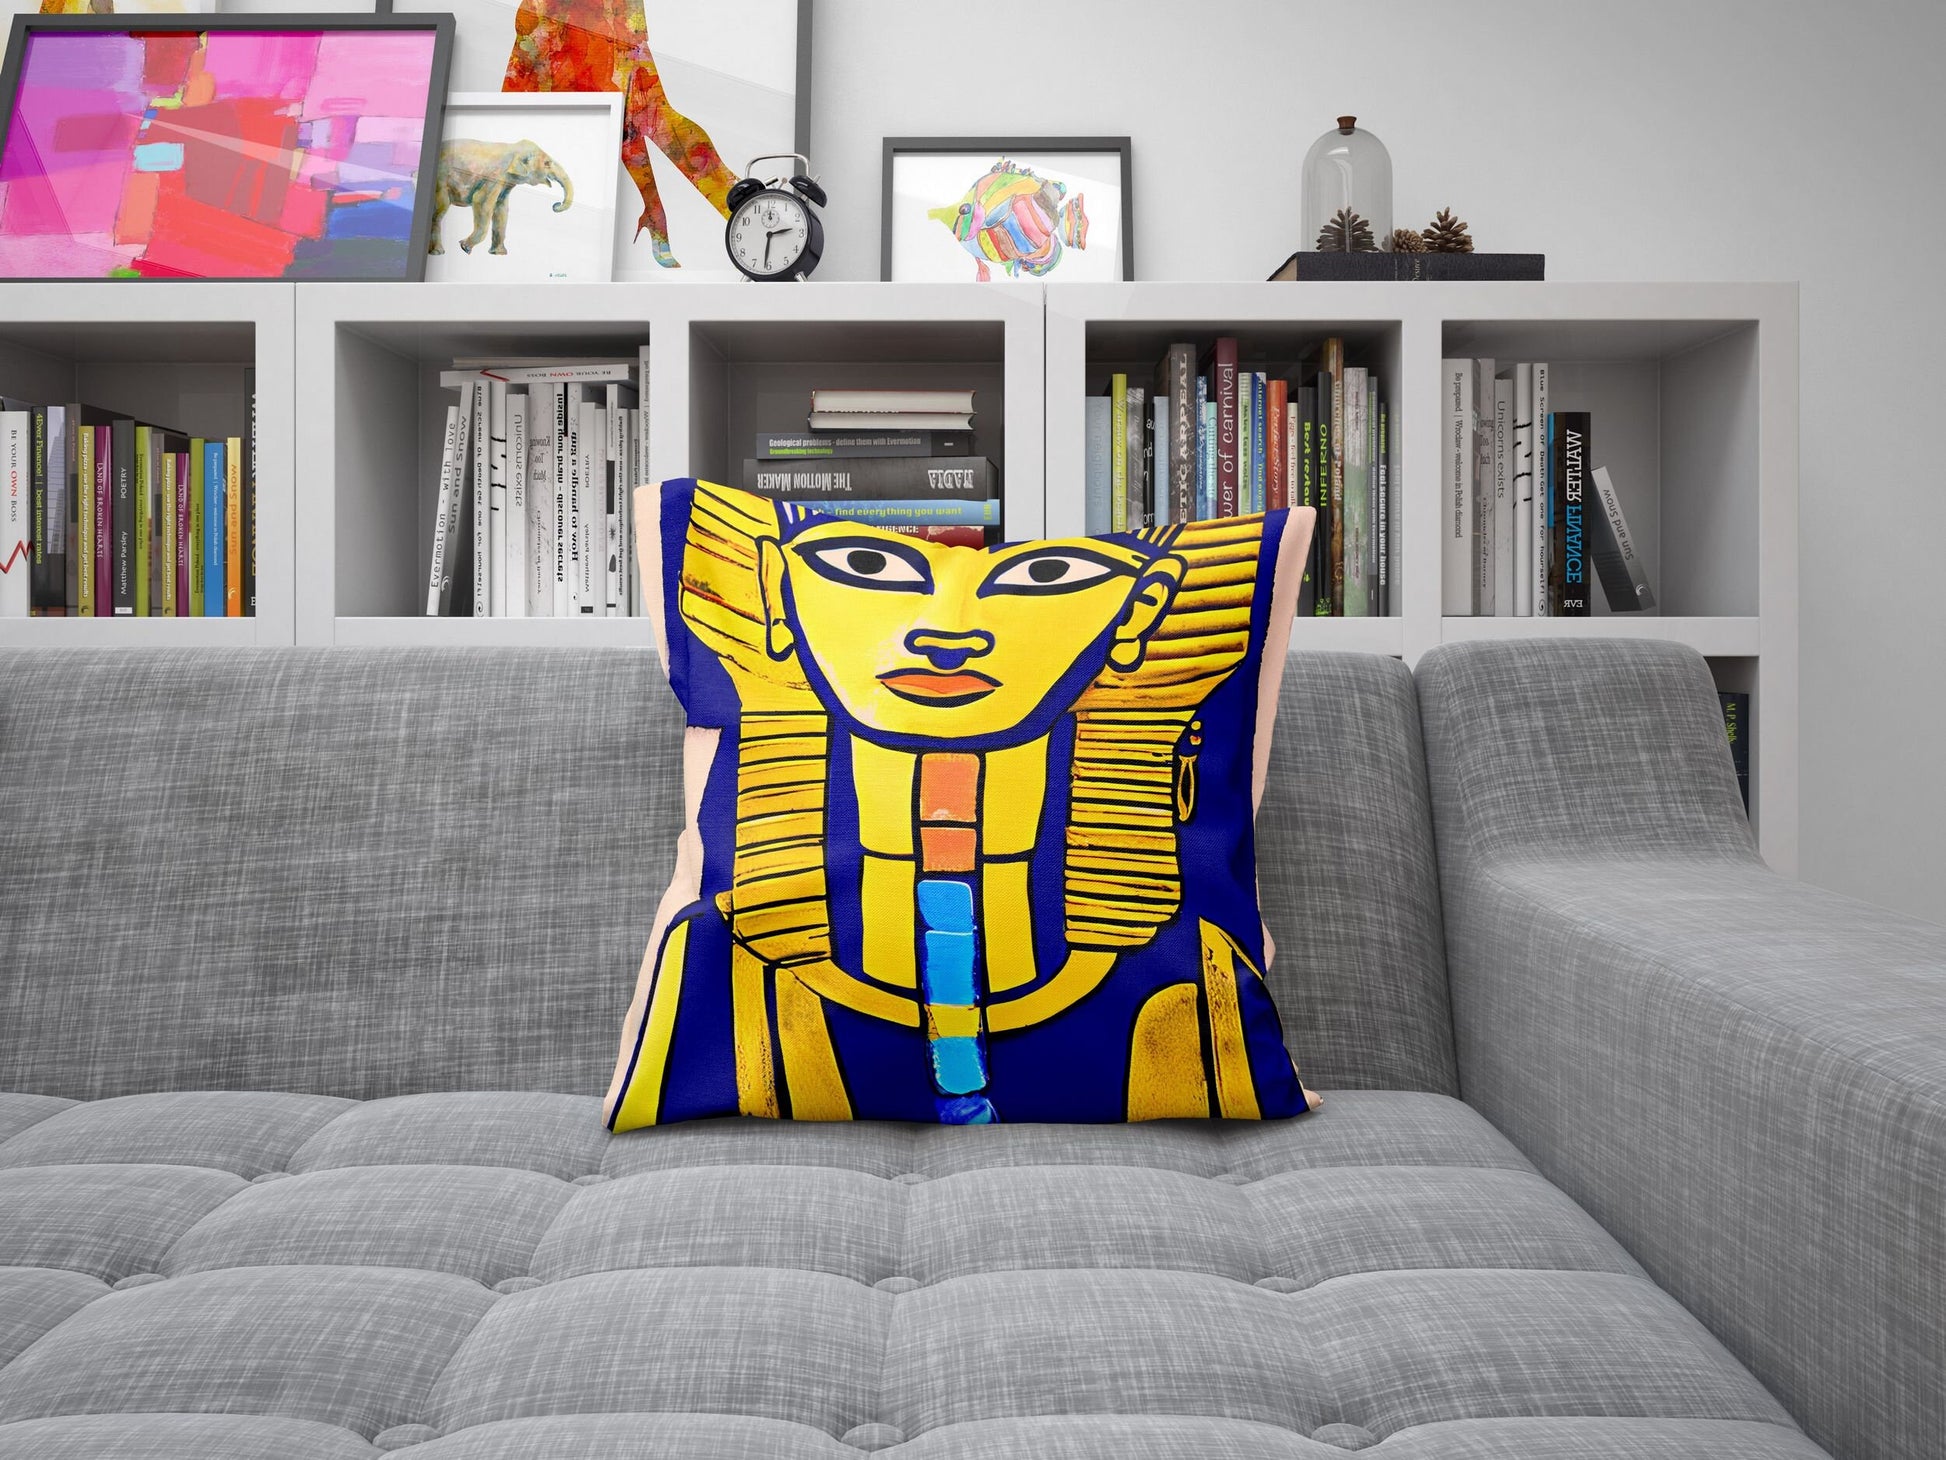 Pharaoh Of Ancient Egypt, Throw Pillow Cover, Abstract Pillow, Art Pillow, Colorful Pillow Case, Beautiful Pillow, Square Pillow